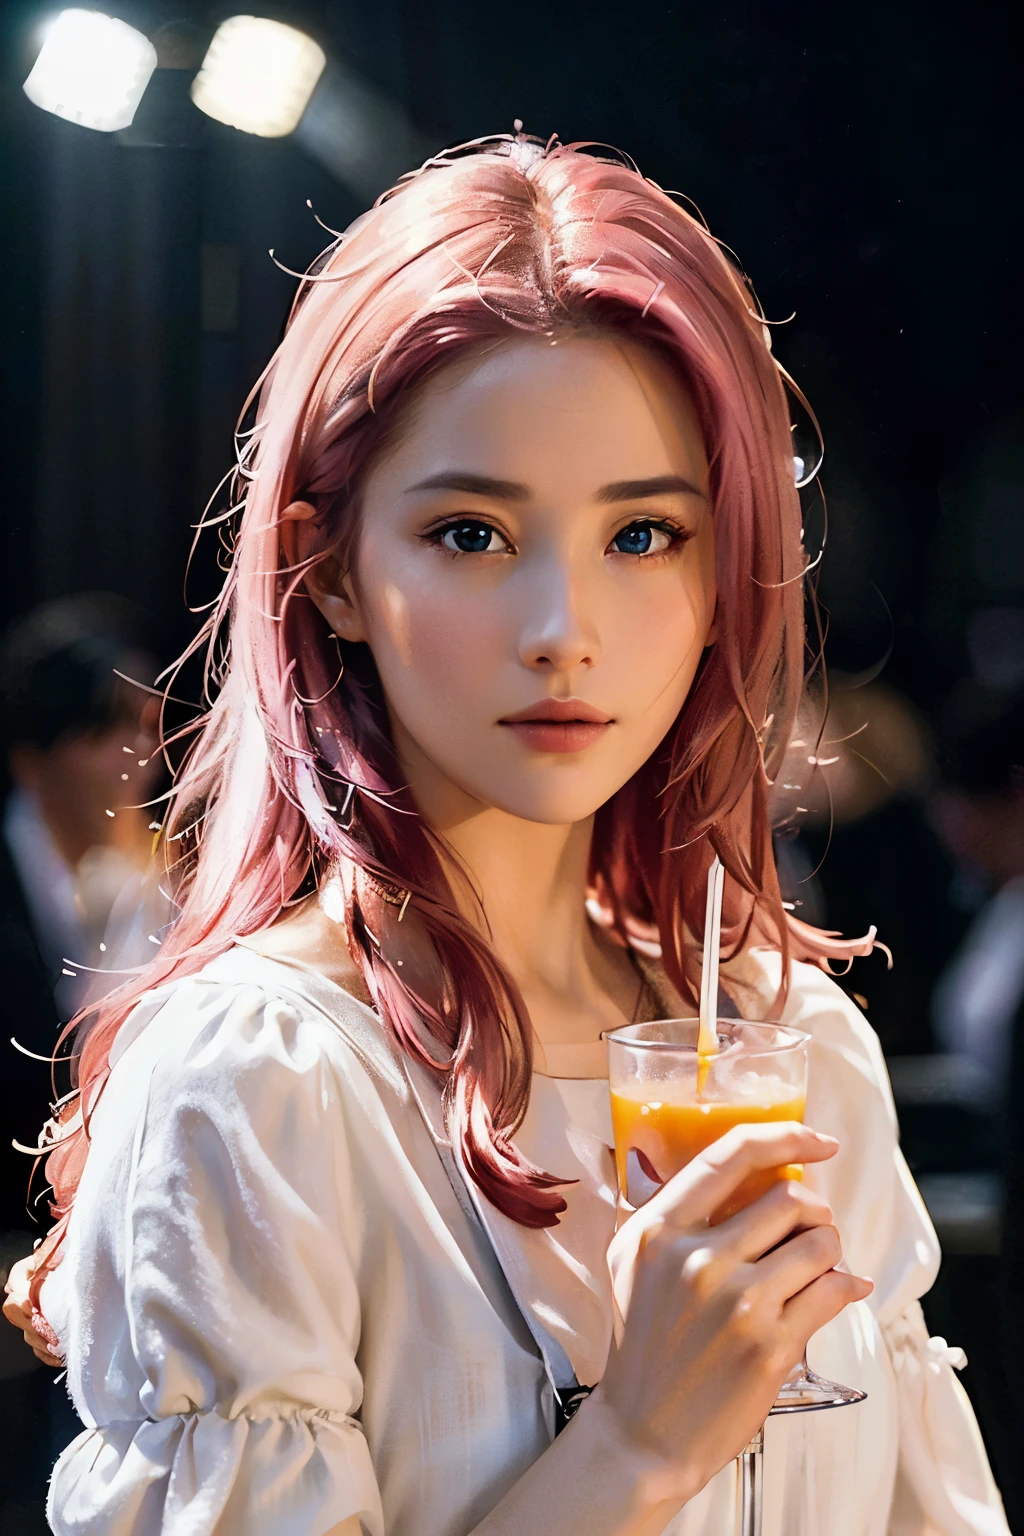 Seven part photos, masterpiece, best quality, official art,pink hair girl，（Drink orange juice：1.3），Enjoy the food，close shot， Goose sweater，White suspenders，Extremely detailed CG 8k wallpaper, ,  crystal texture skin, cold expression, pink hair, long hair, messy hair, looking at the audience, extremely delicate and beautiful,   ((beautiful and delicate eyes)), Very detailed, movie lighting,((pretty face), (original figure painting), super detailed, Very detailed,  (extremely delicate and beautiful), beautiful and delicate eyes, 